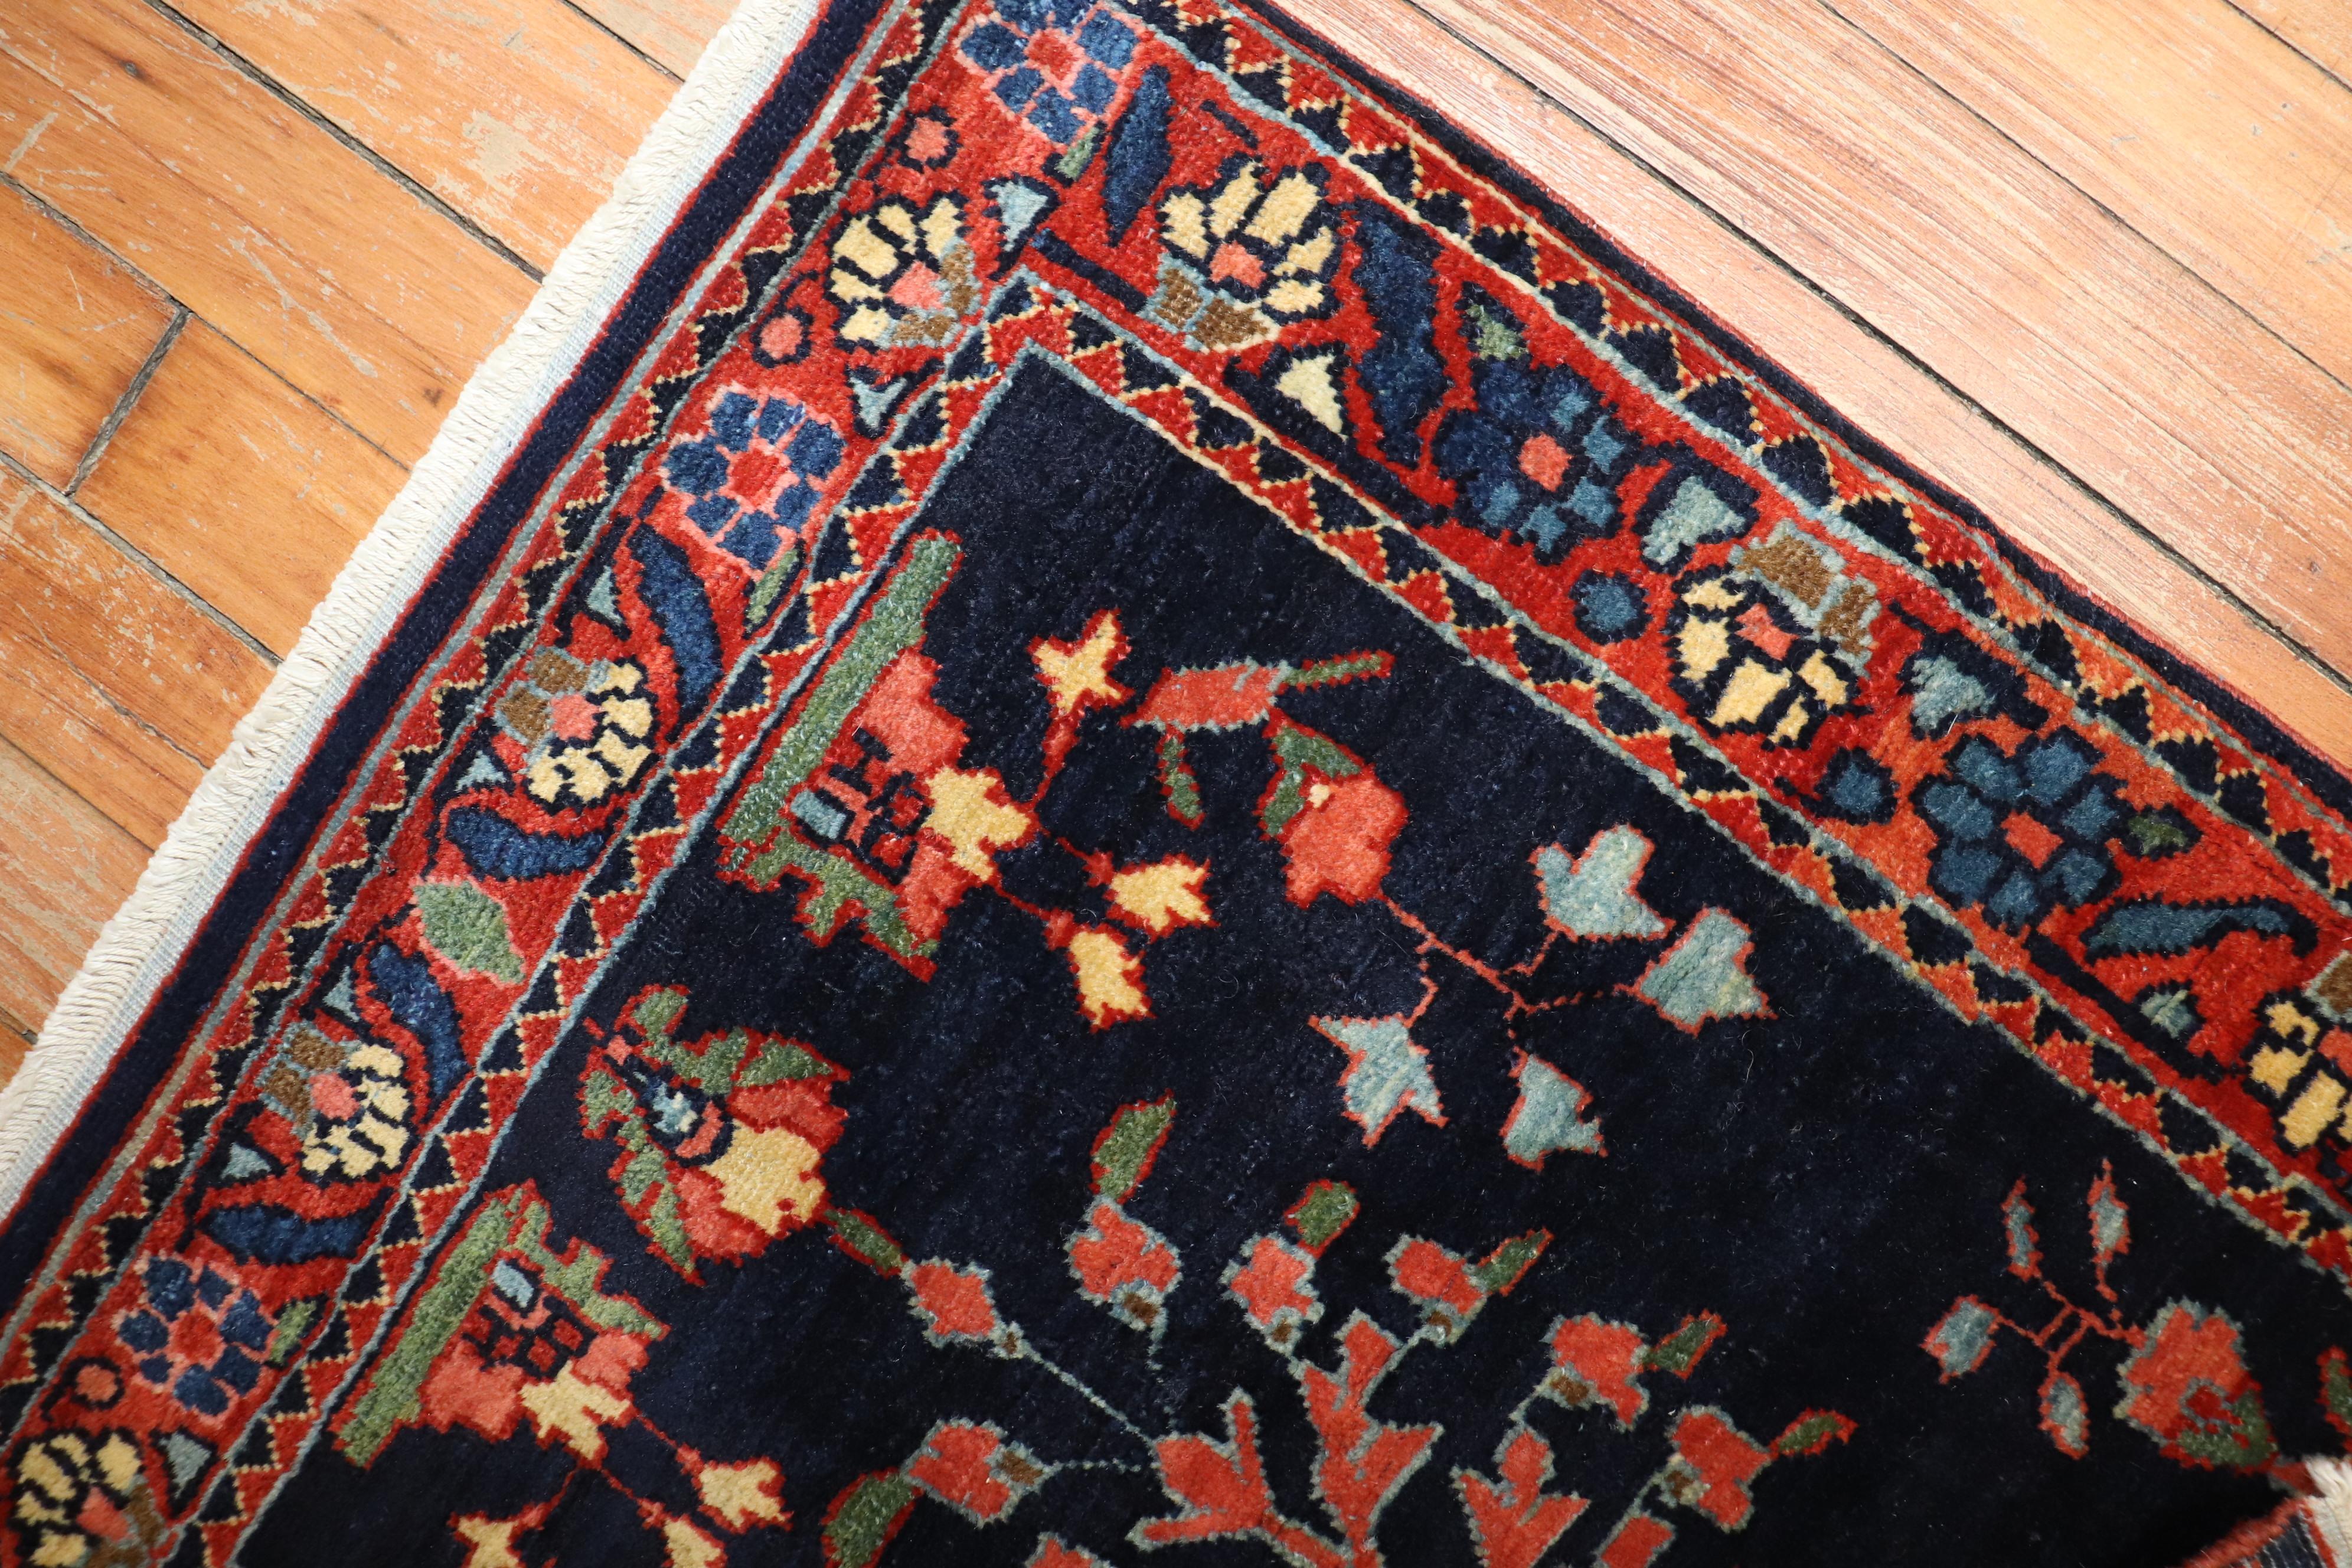 An authentic early 20th-century Sarouk carpet with traditional formal design 

Measures: 1'10